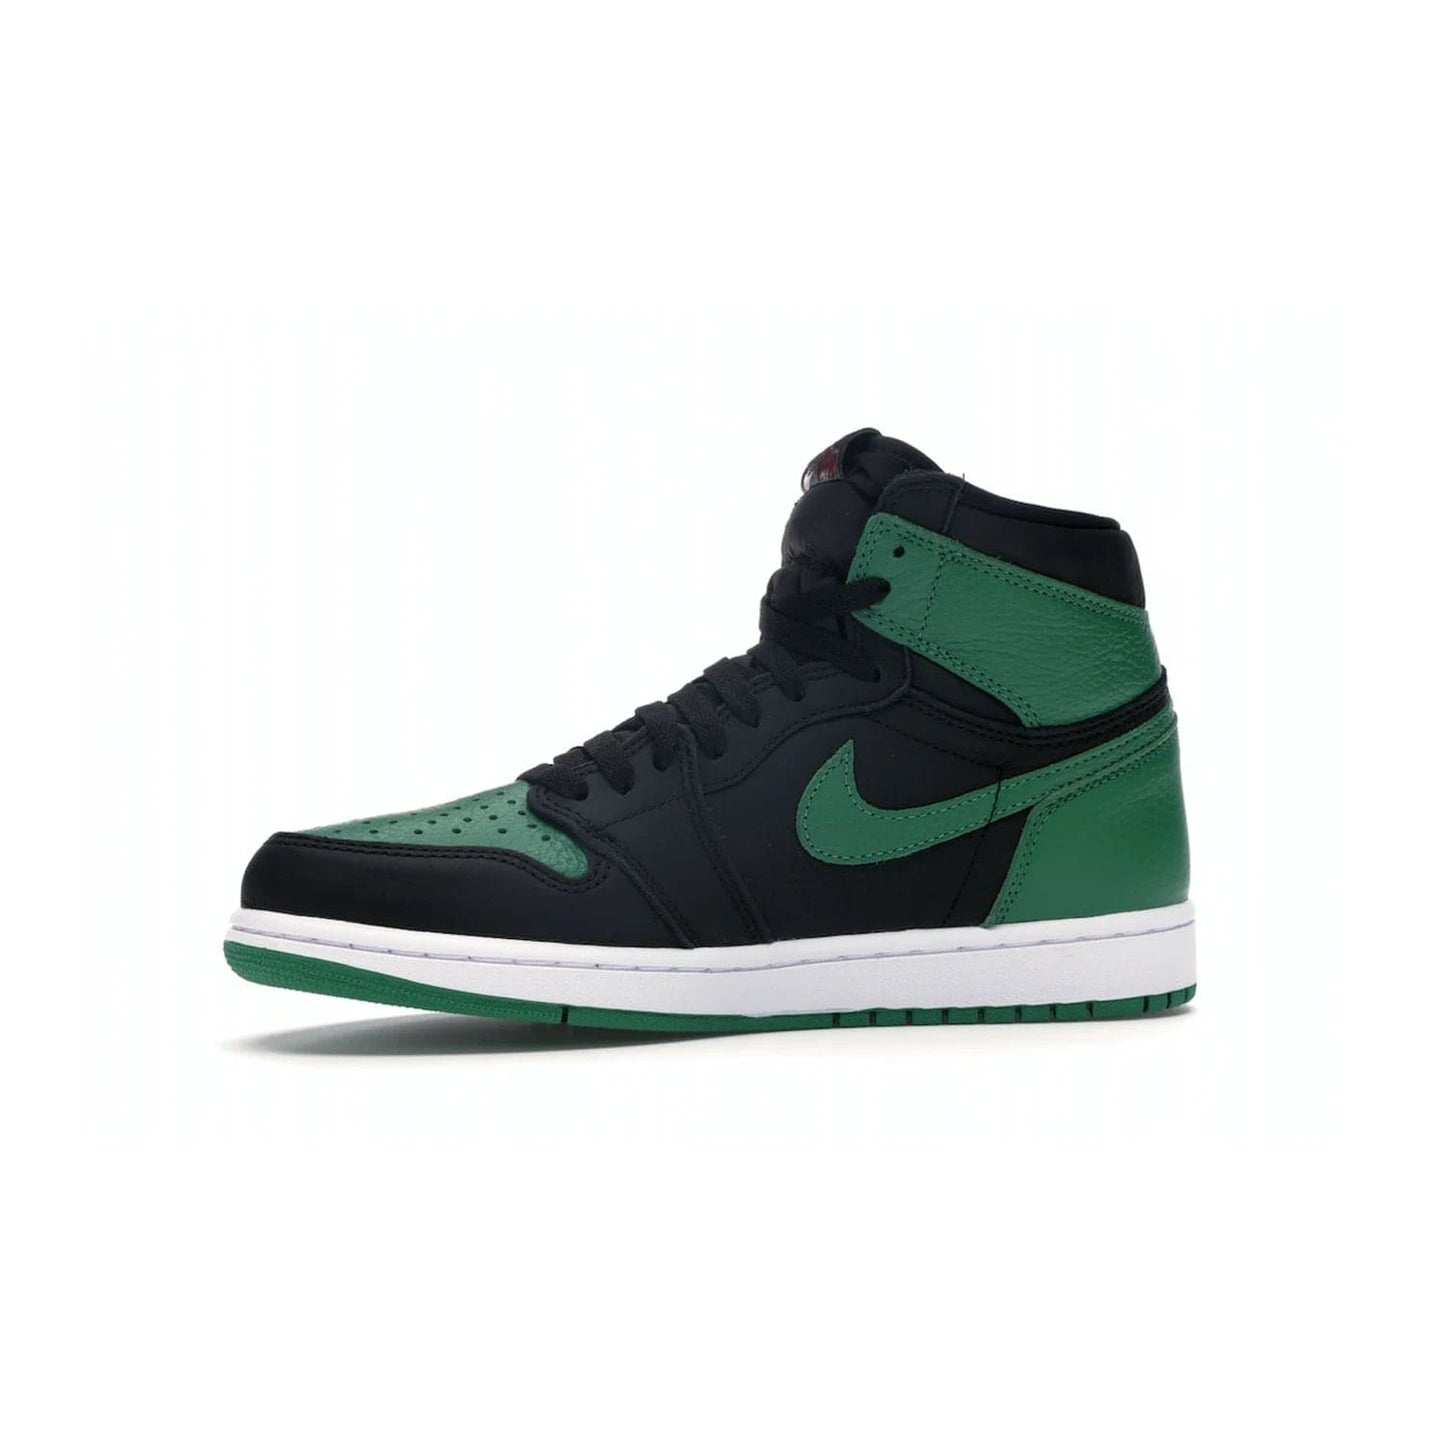 Jordan 1 Retro High Pine Green Black - Image 17 - Only at www.BallersClubKickz.com - Step into fresh style with the Jordan 1 Retro High Pine Green Black. Combining a black tumbled leather upper with green leather overlays, this sneaker features a Gym Red embroidered tongue tag, sail midsole, and pine green outsole for iconic style with a unique twist.